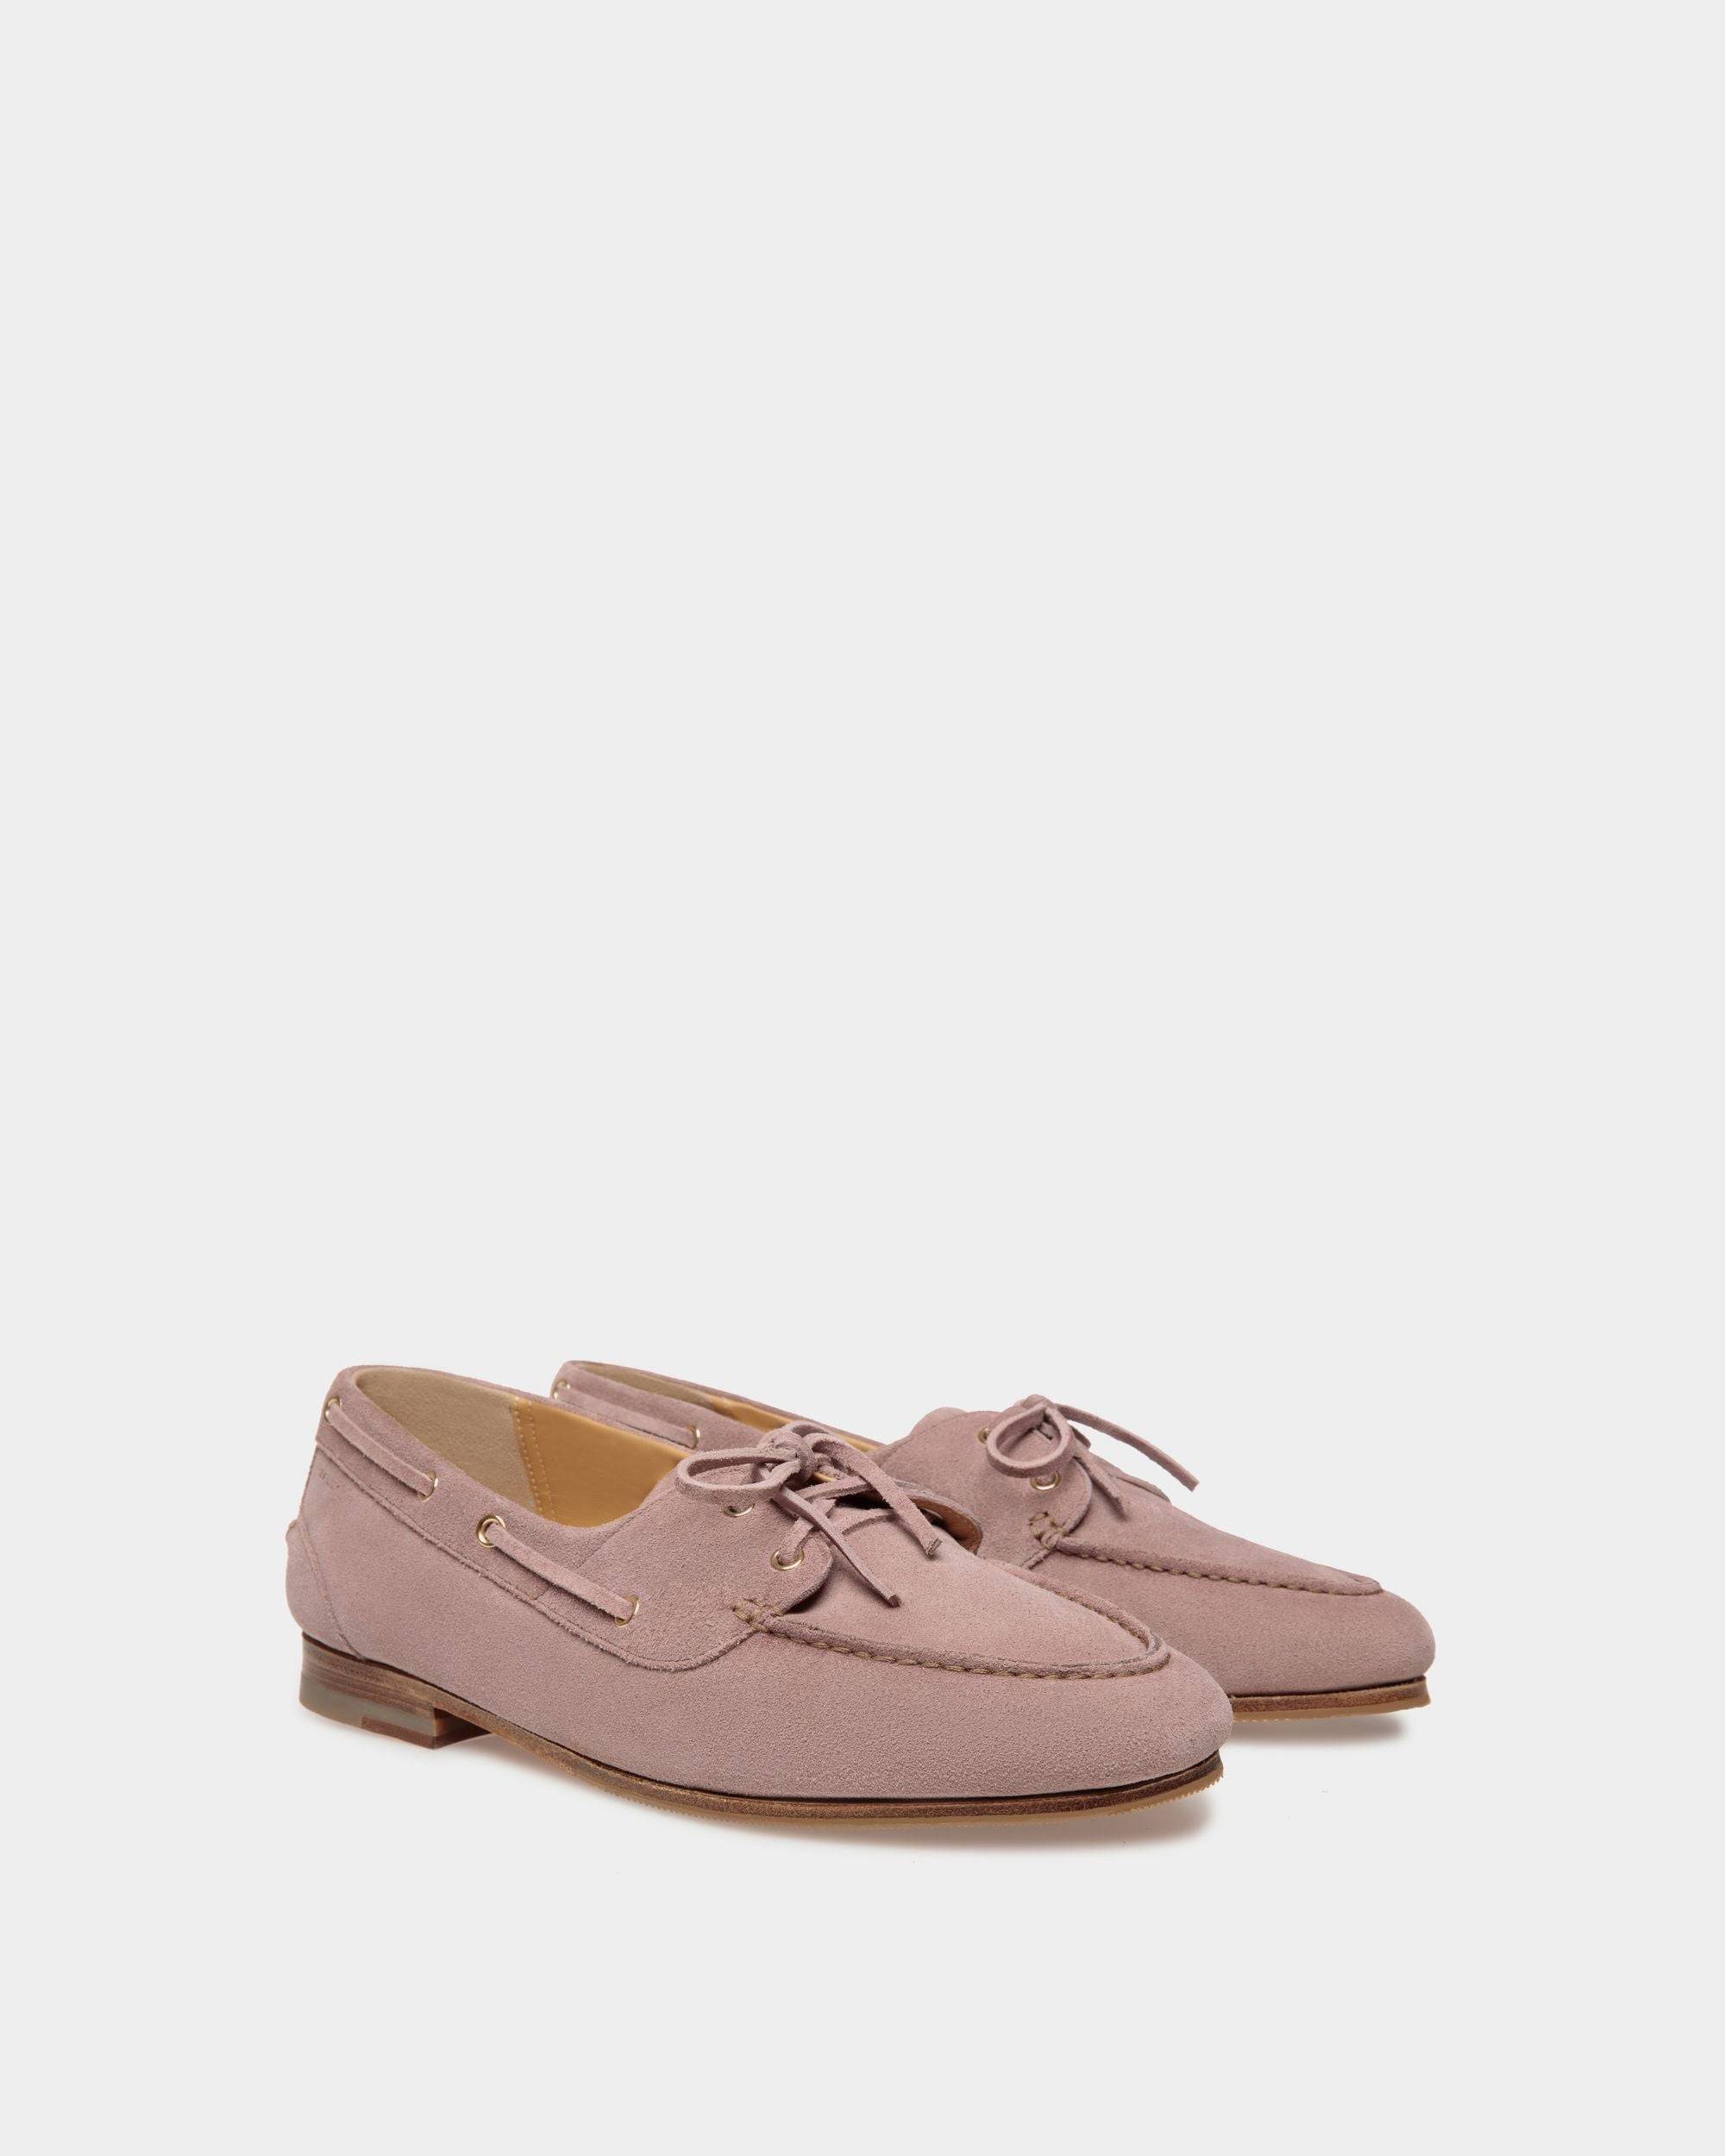 Plume | Men's Moccasin in Light Mauve Suede| Bally | Still Life 3/4 Front